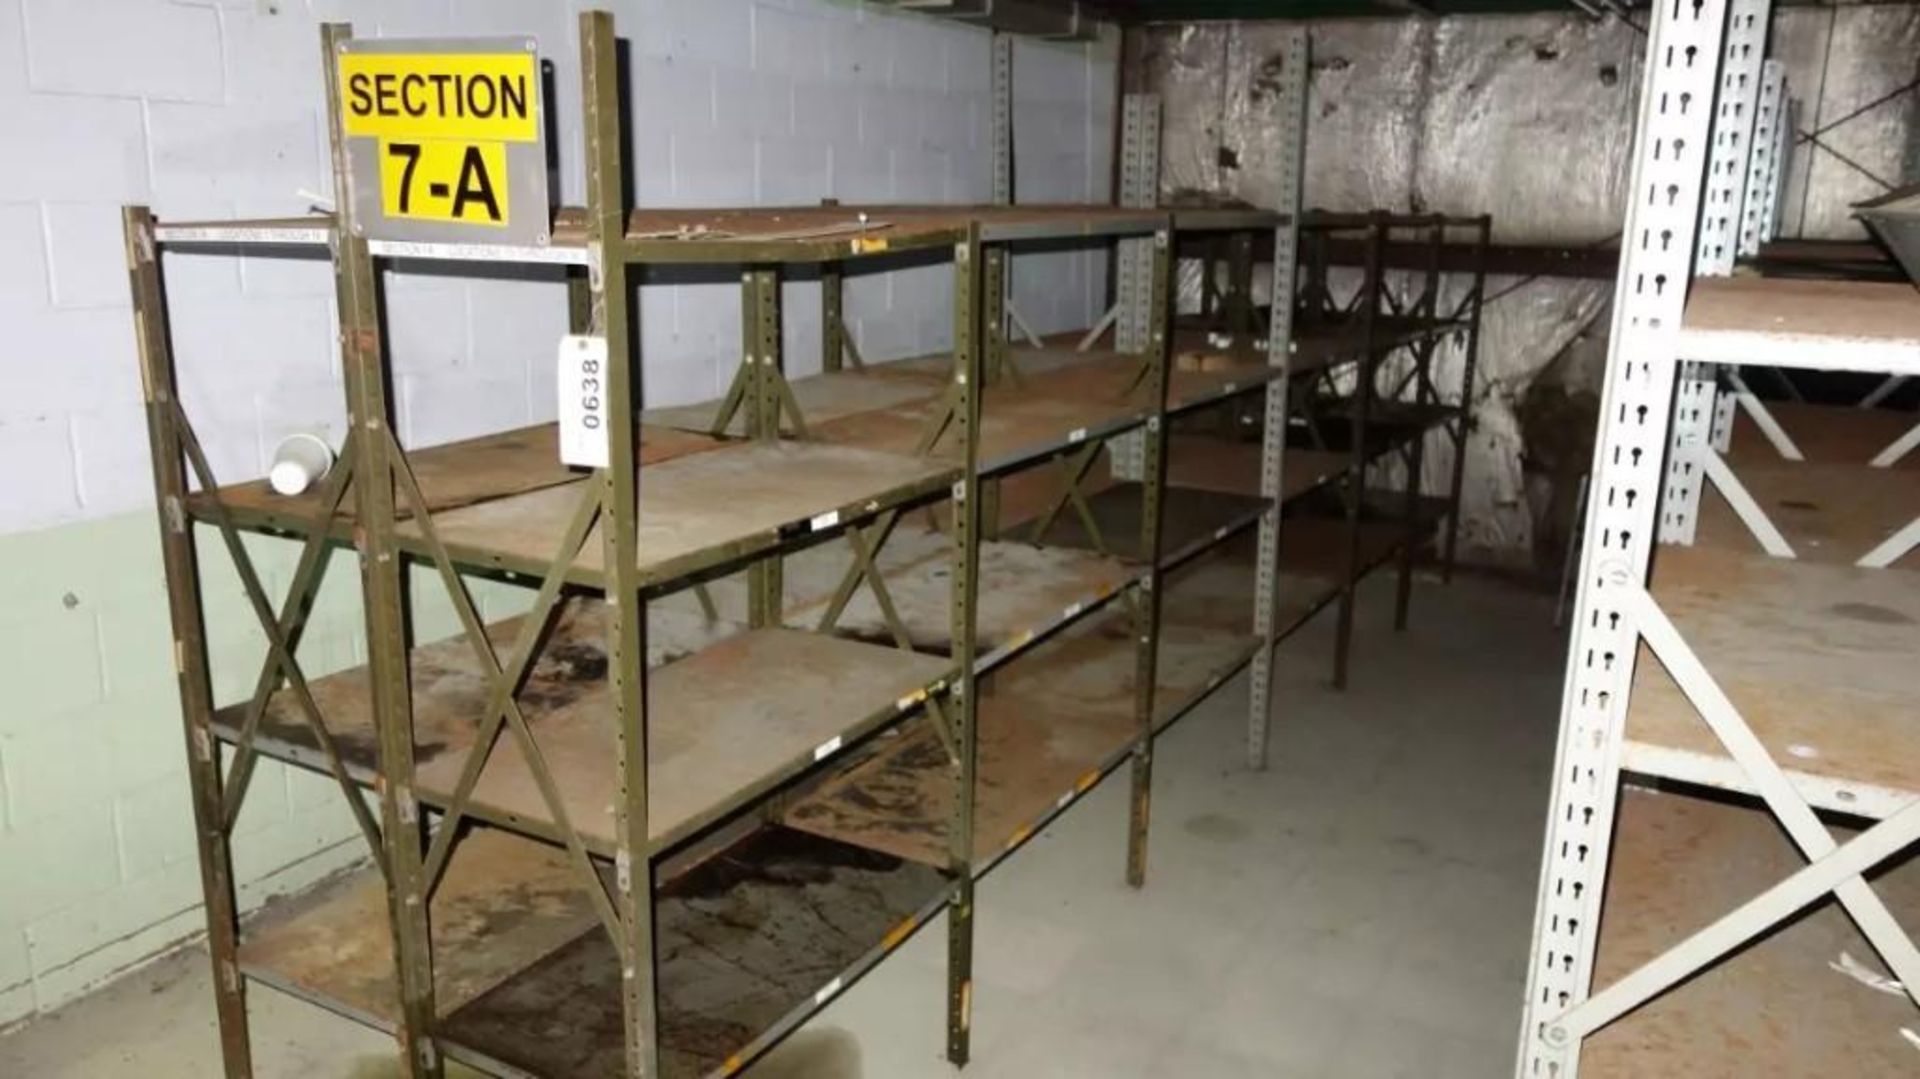 3 ROWS OF STEEL SHELVING, APPROX 18FT LONG, 4FT HIGH